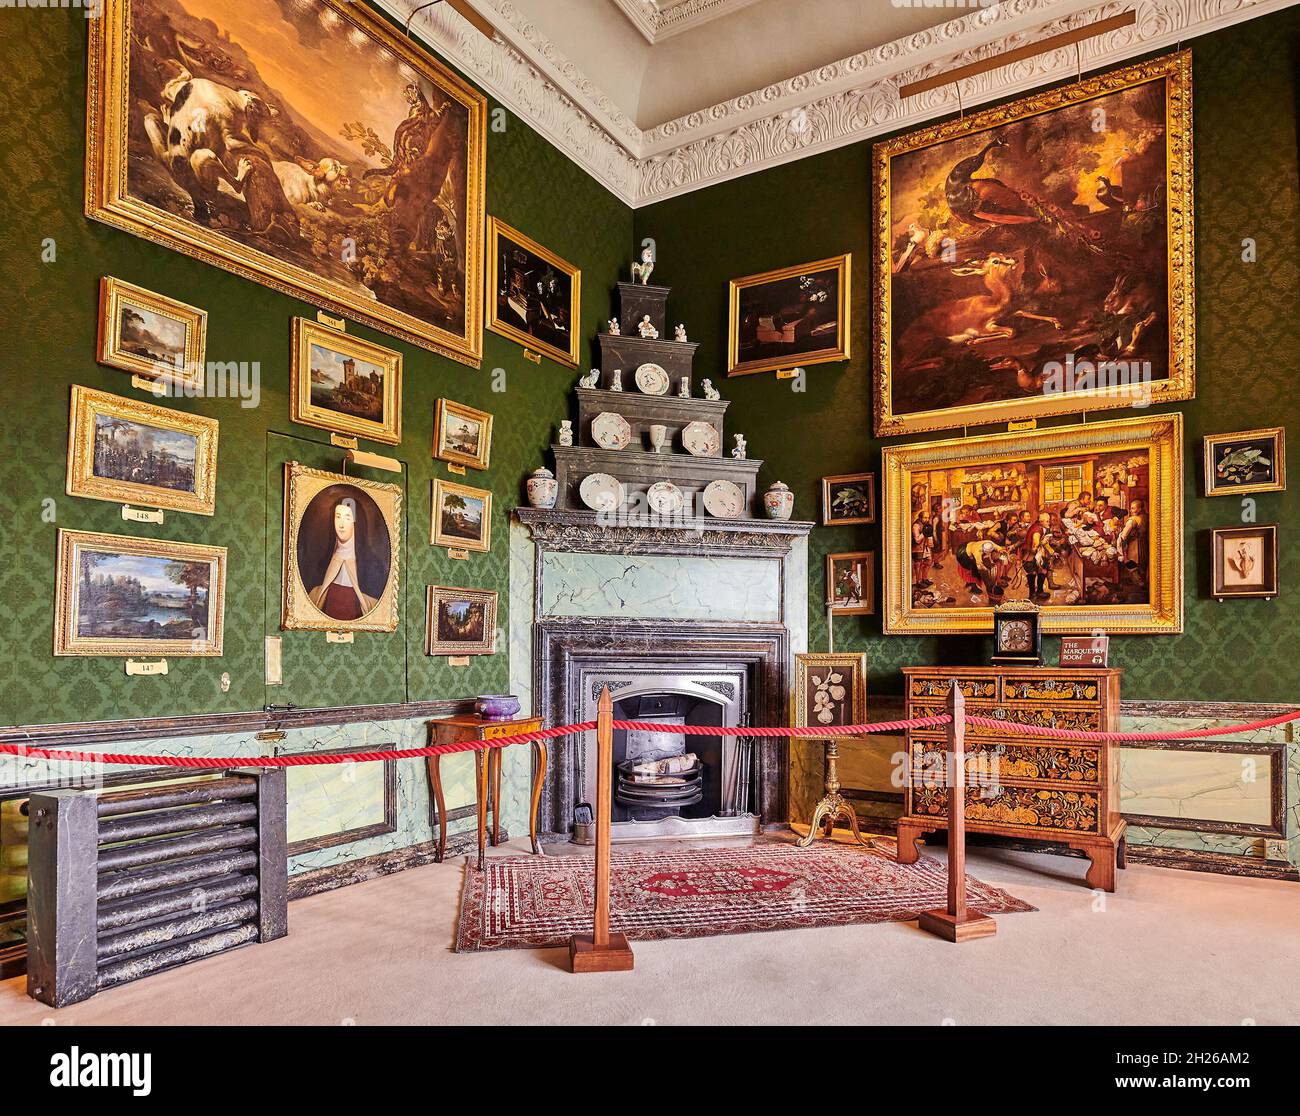 Fireplace in the marquetry room at Burghley House, an elizabethan mansion built by William Cecil, Lord Burghley, at Stamford in 16 century England. Stock Photo